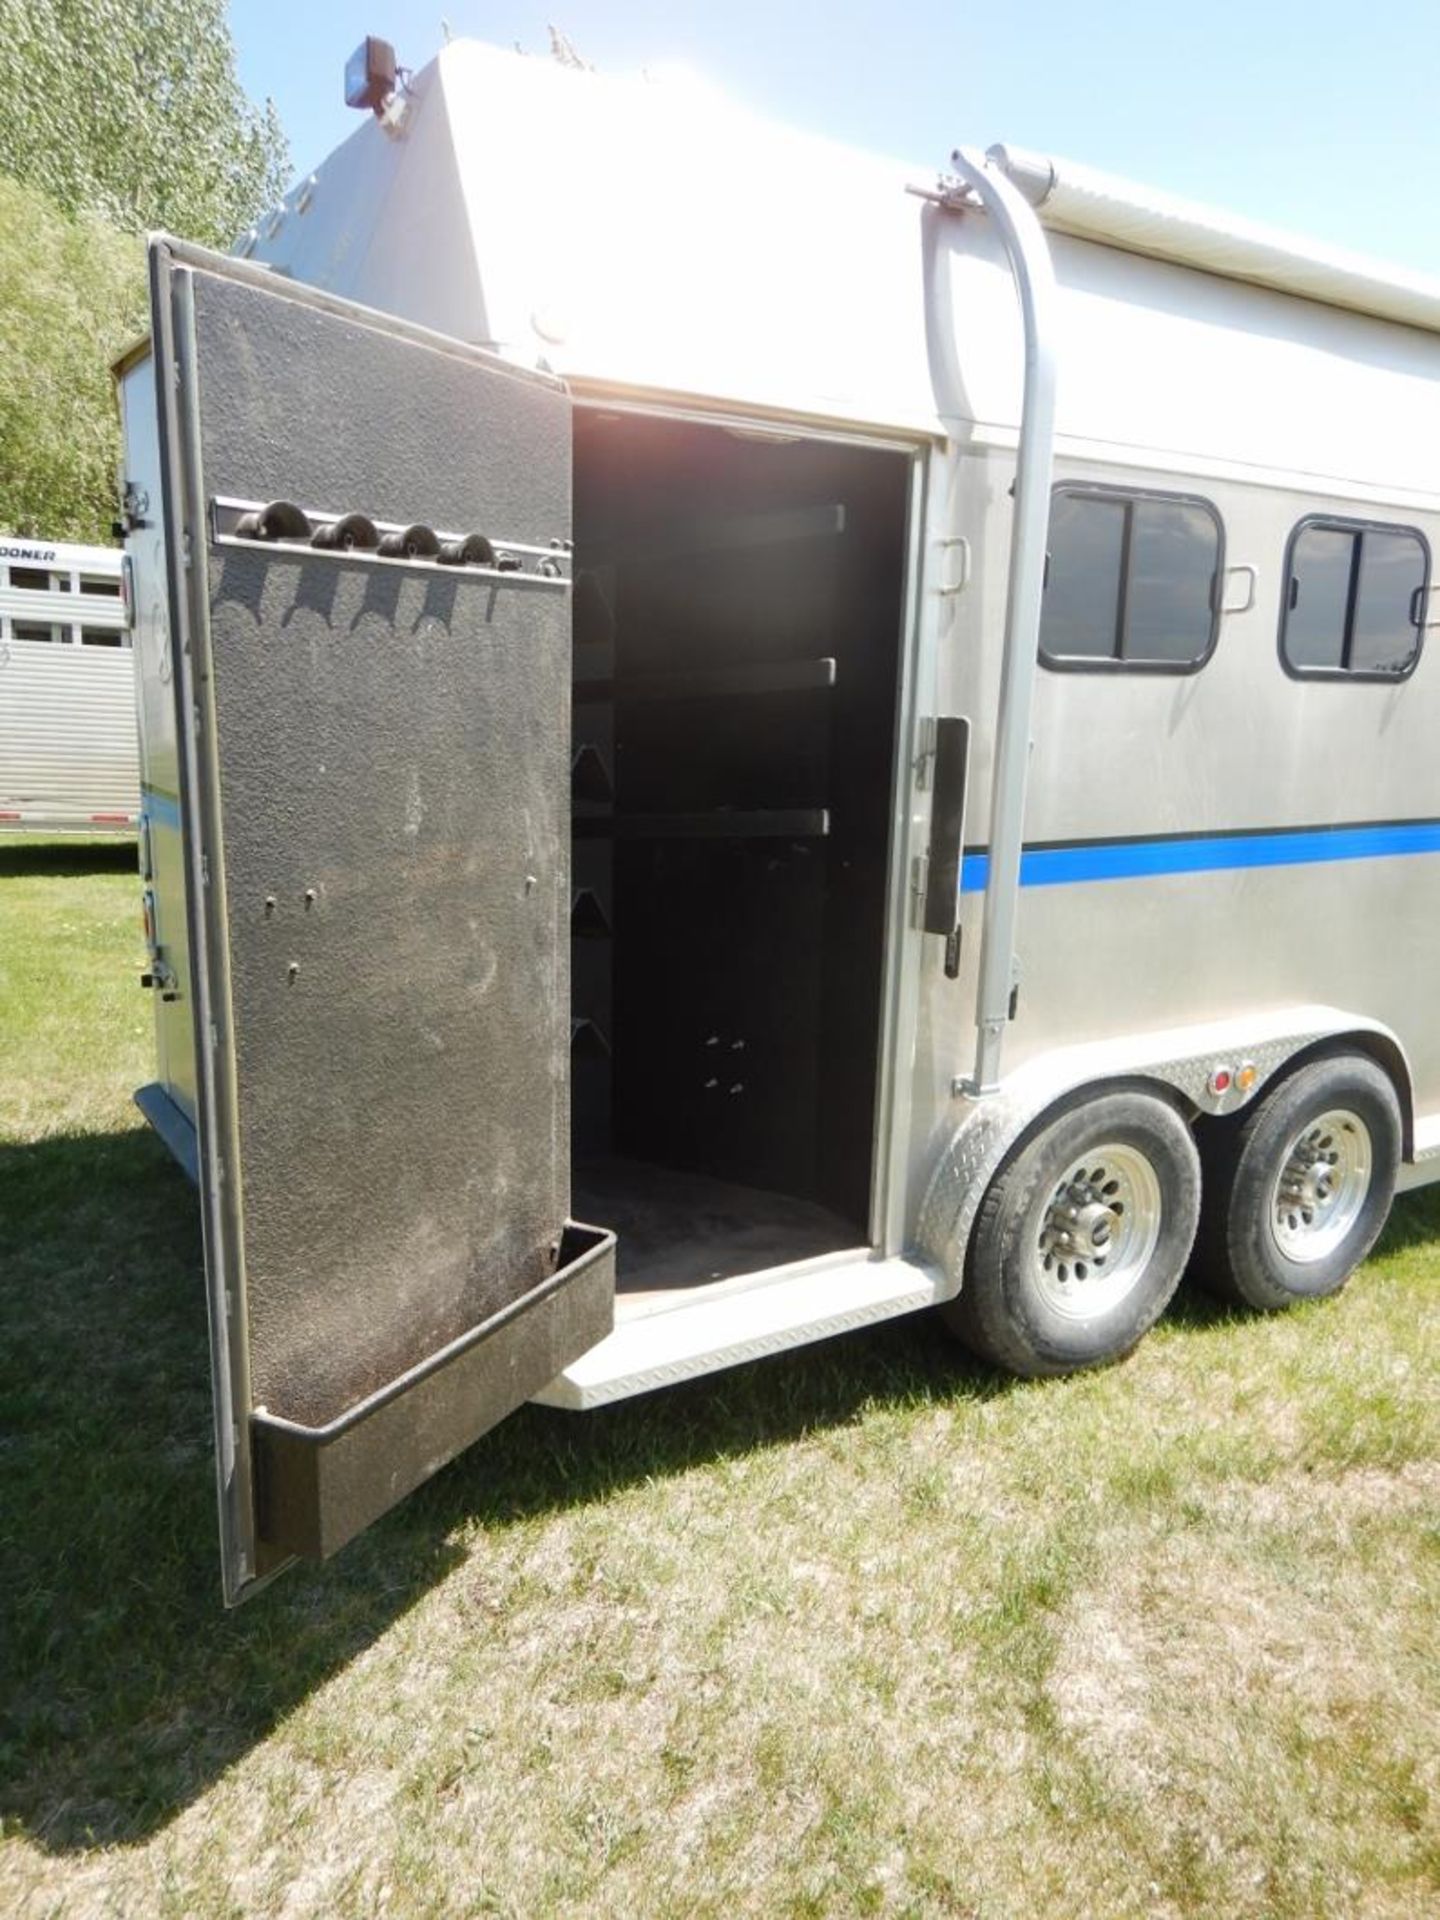 2003 ROCKIES CONVERSIONS SS 4-HORSE RH ANGLE HAUL TRAILER W/LIVING QUARTERS, A/C, INTEGRATED GEN SET - Image 9 of 22